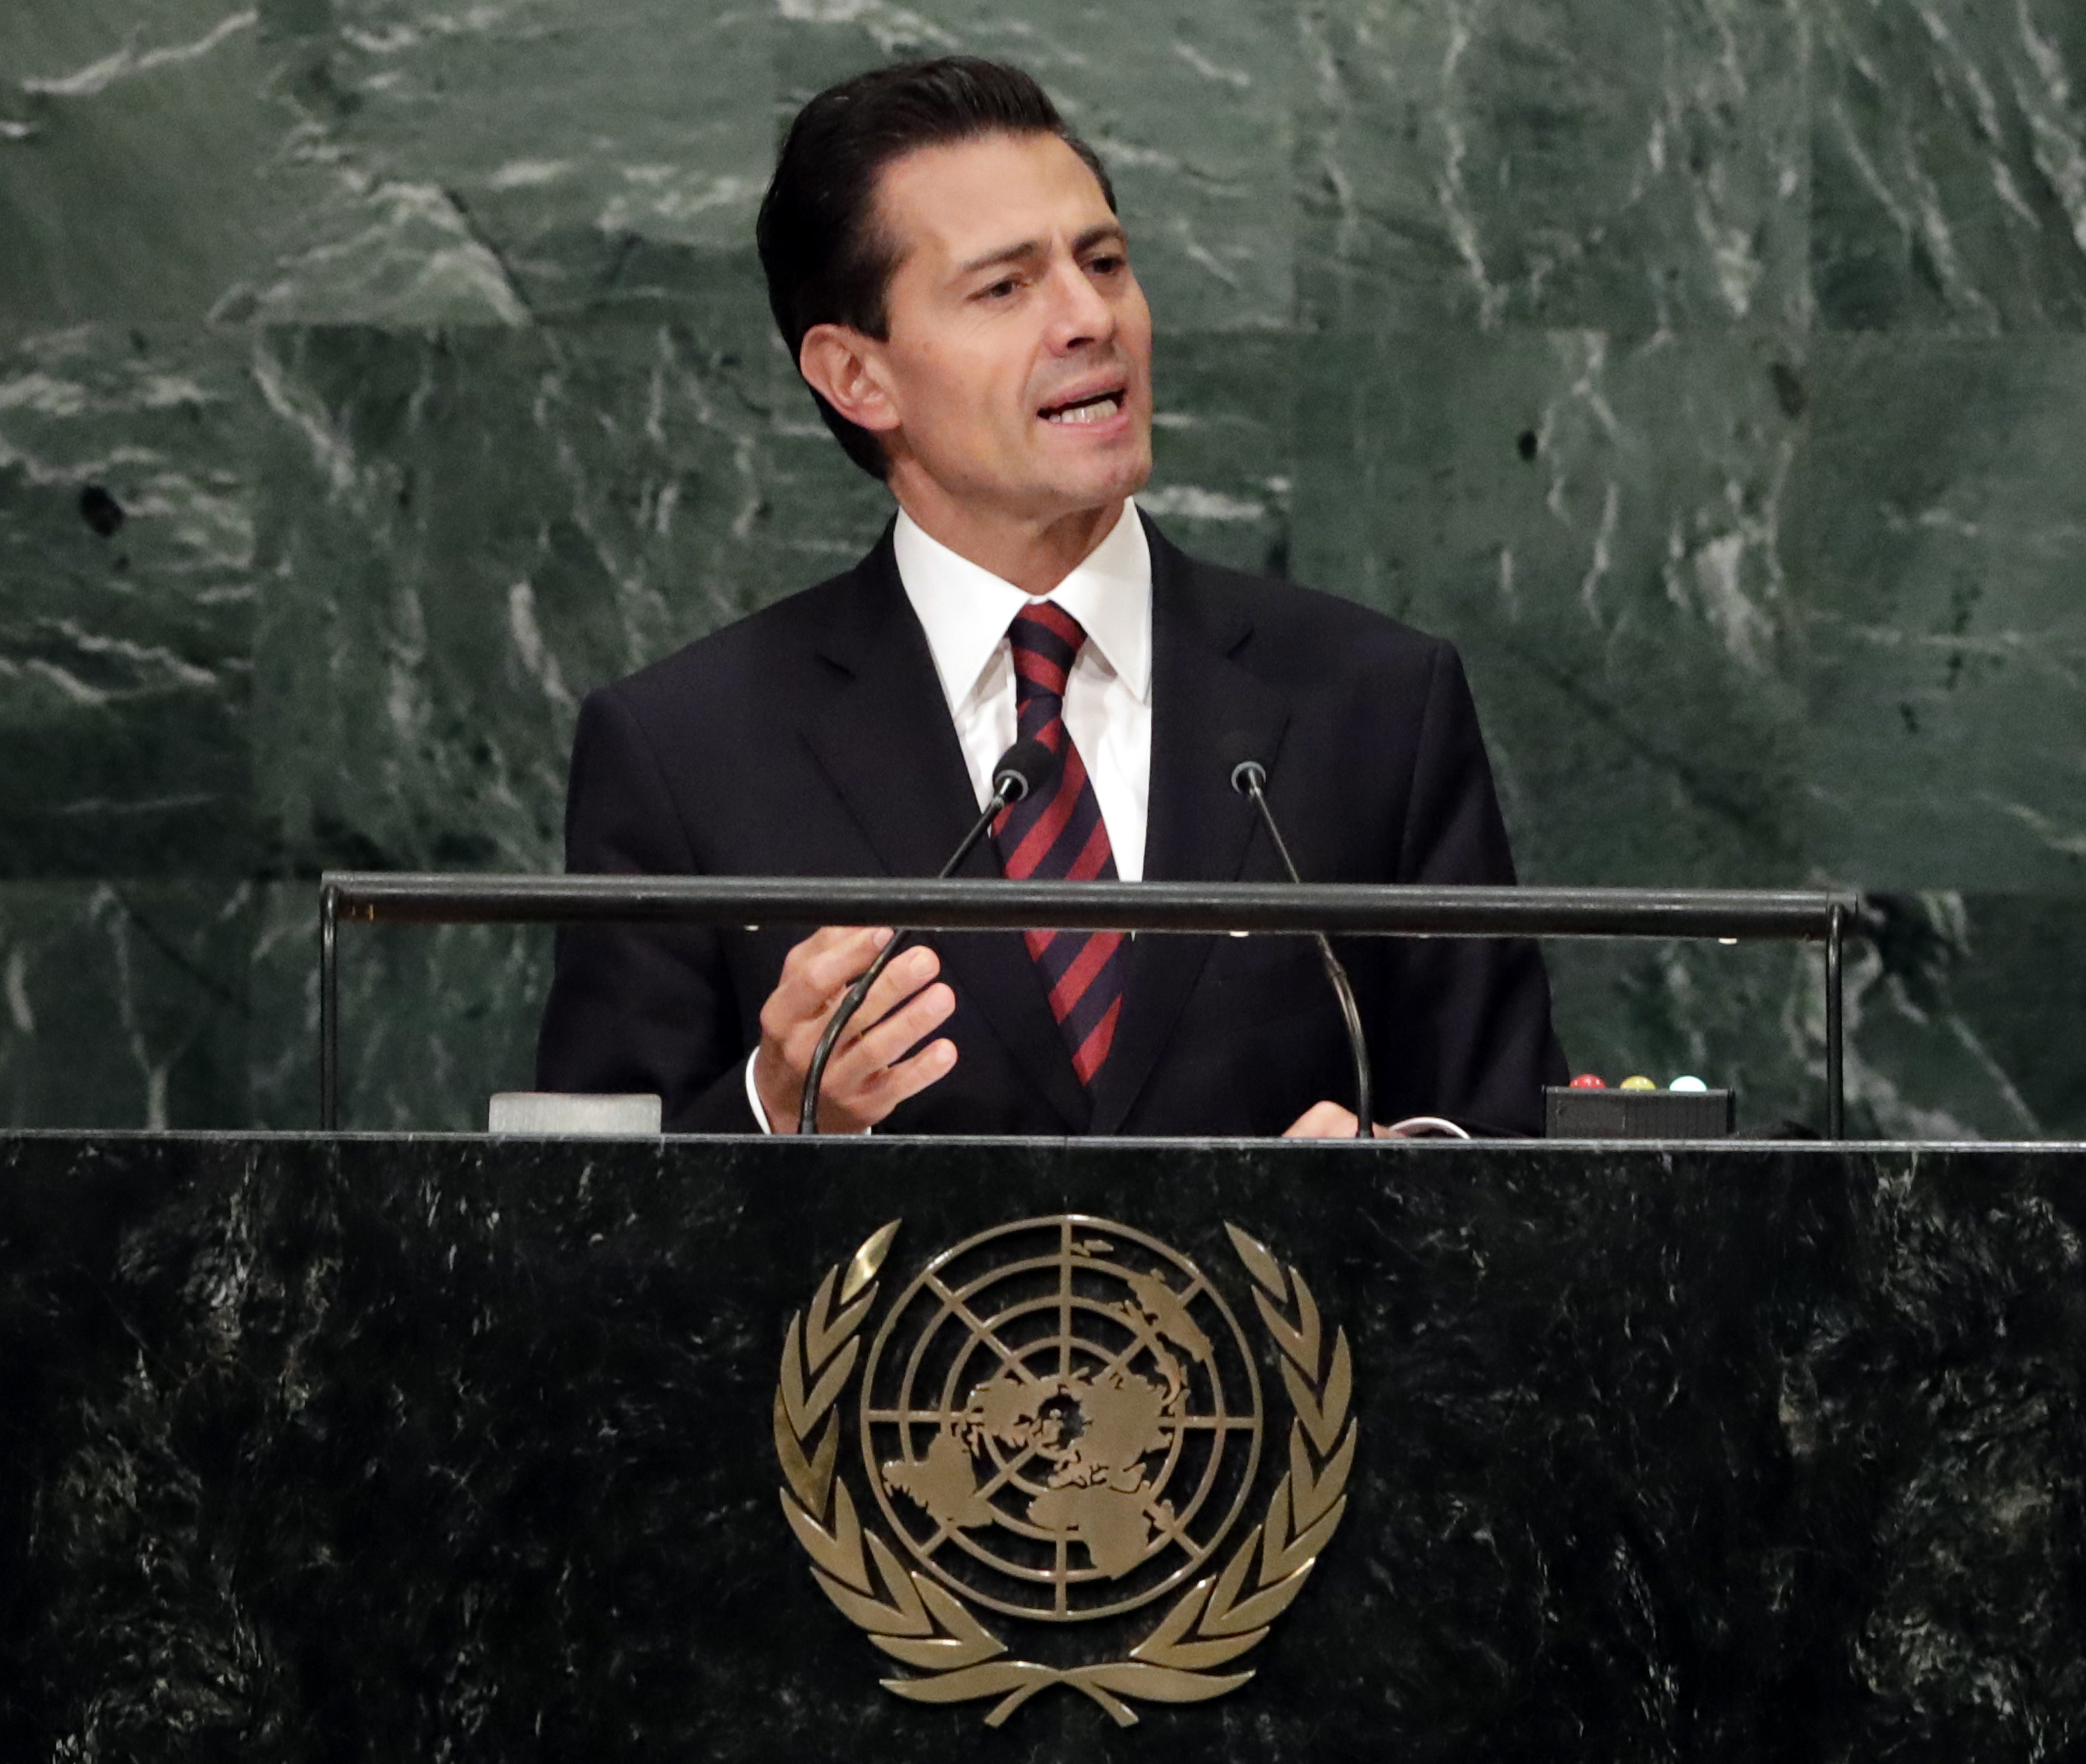 Mexican President Enrique Pe&ntilde;a Nieto addresses the General Debate of the 71st Session of the U.N. General Assembly at the U.N. headquarters in New York City on Sept. 20, 2016 (Jason Szenes—EPA)